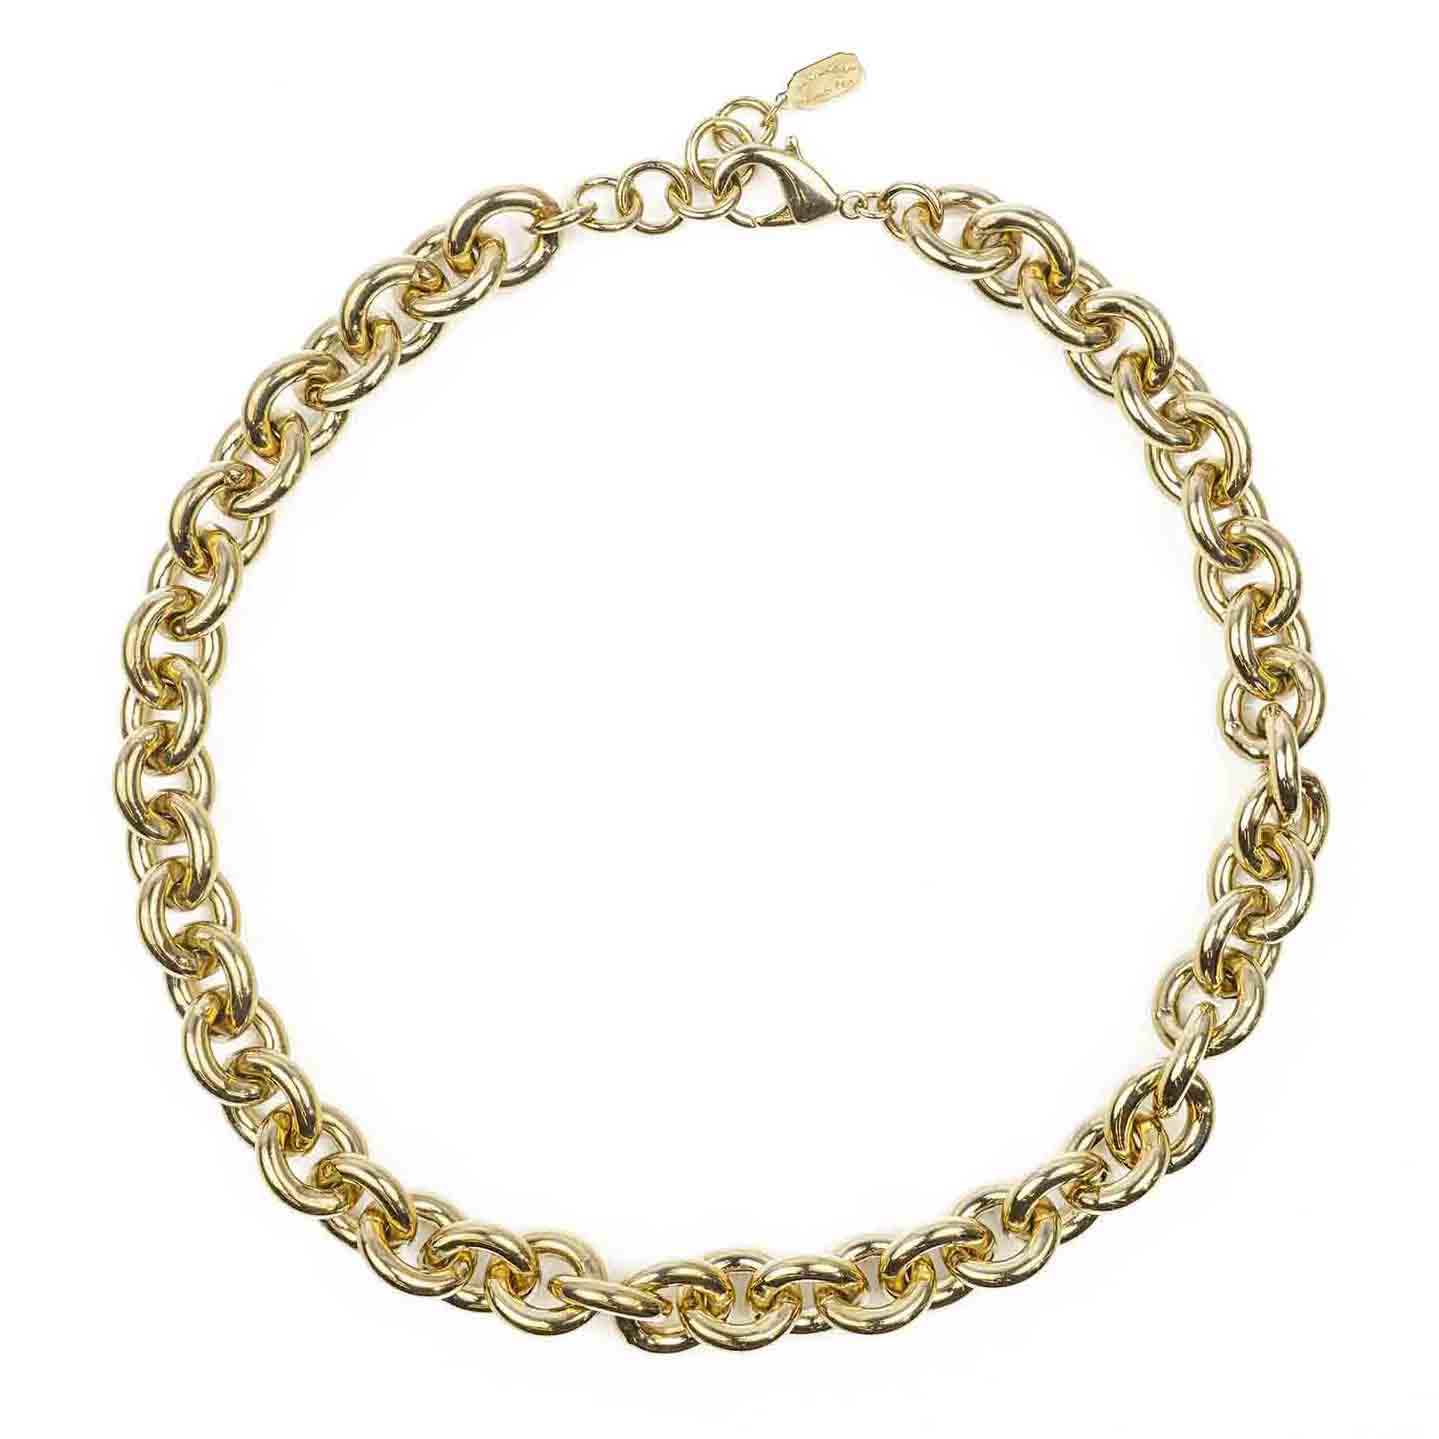 Oval link chain necklace